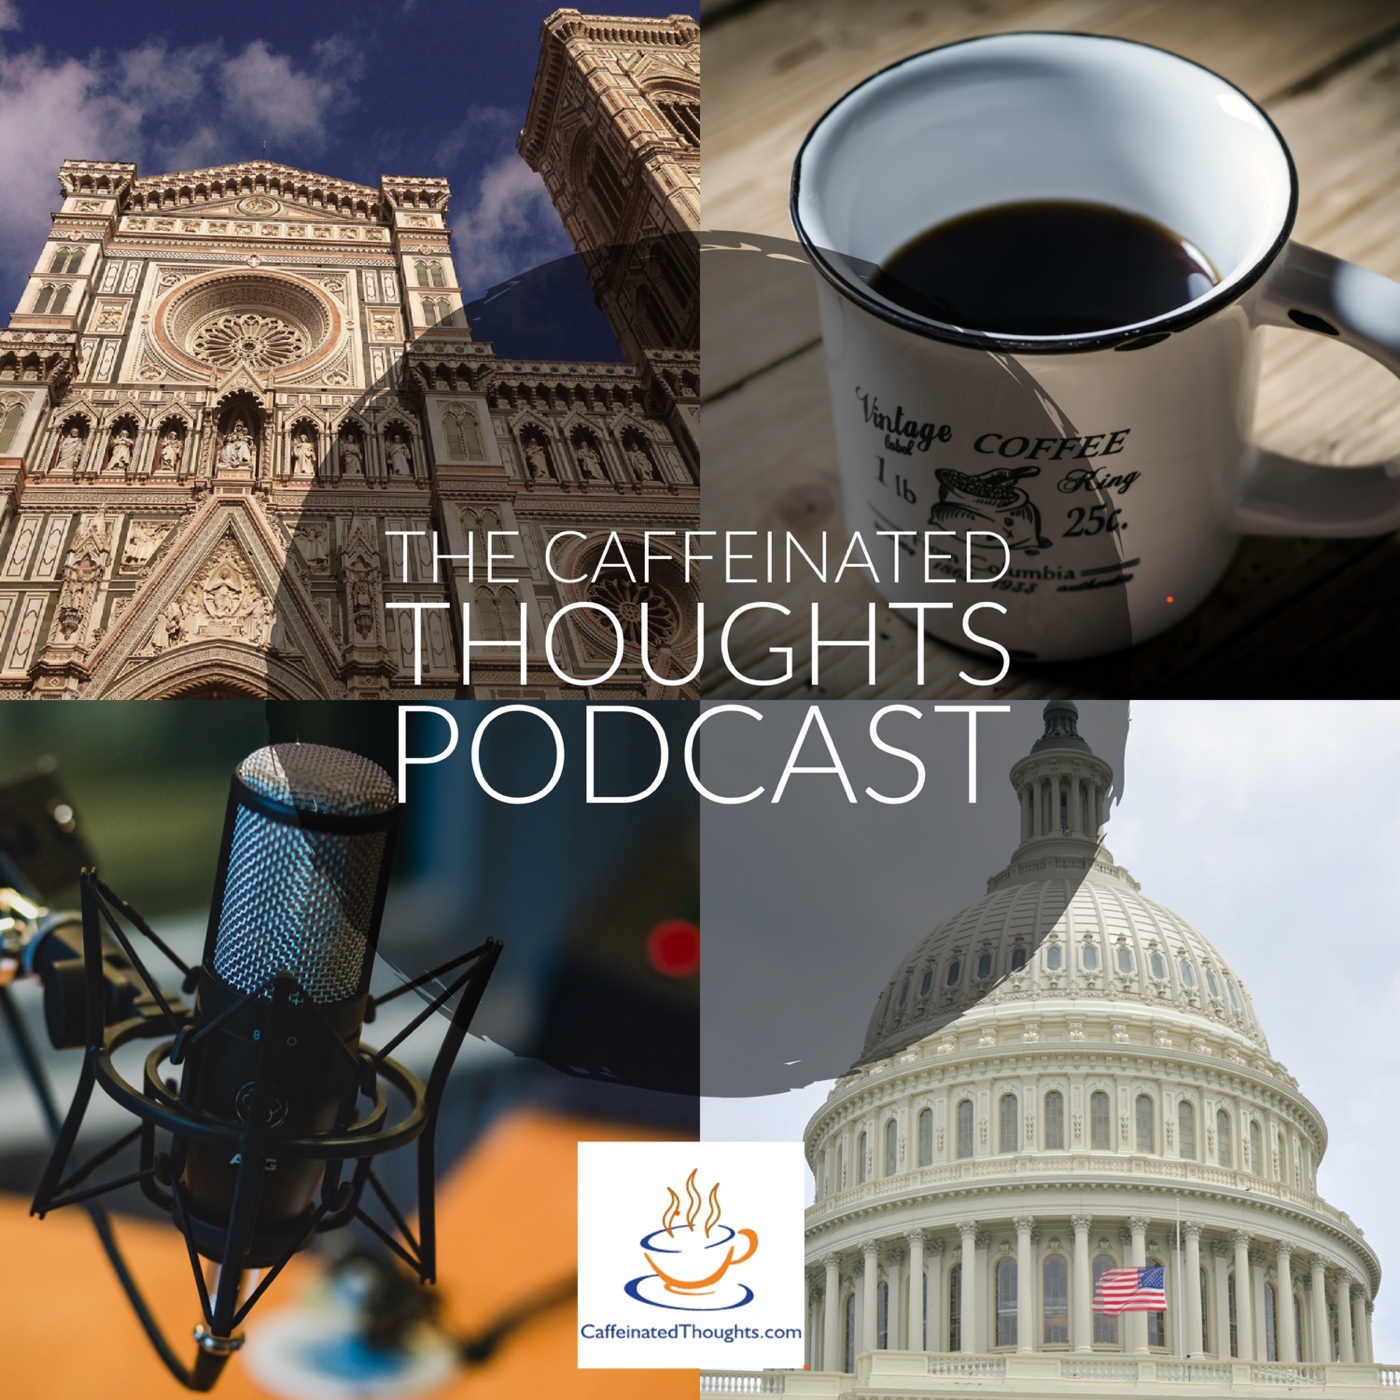 The Caffeinated Thoughts Podcast